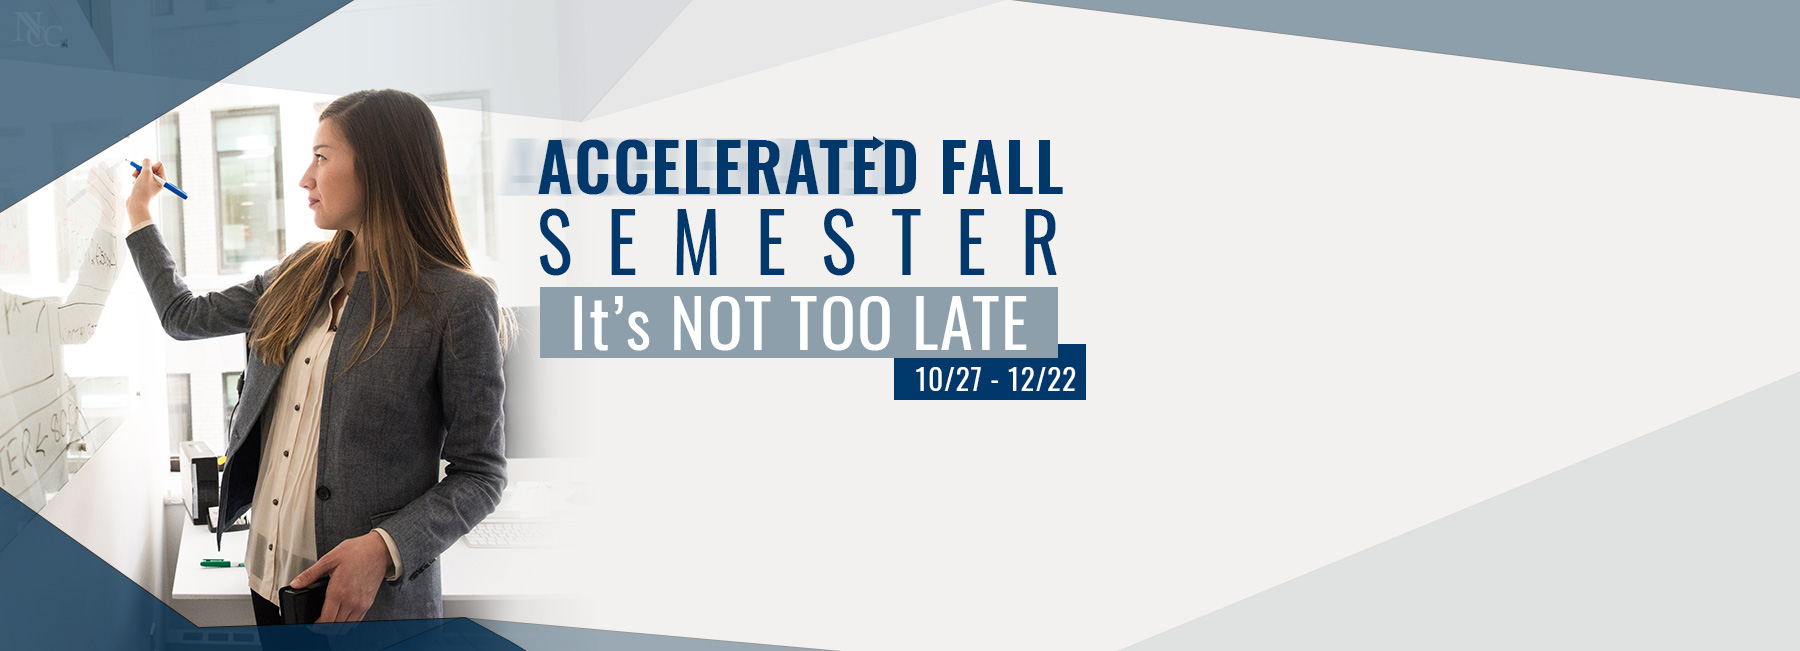 Accelerated Fall Semester. Its not too late